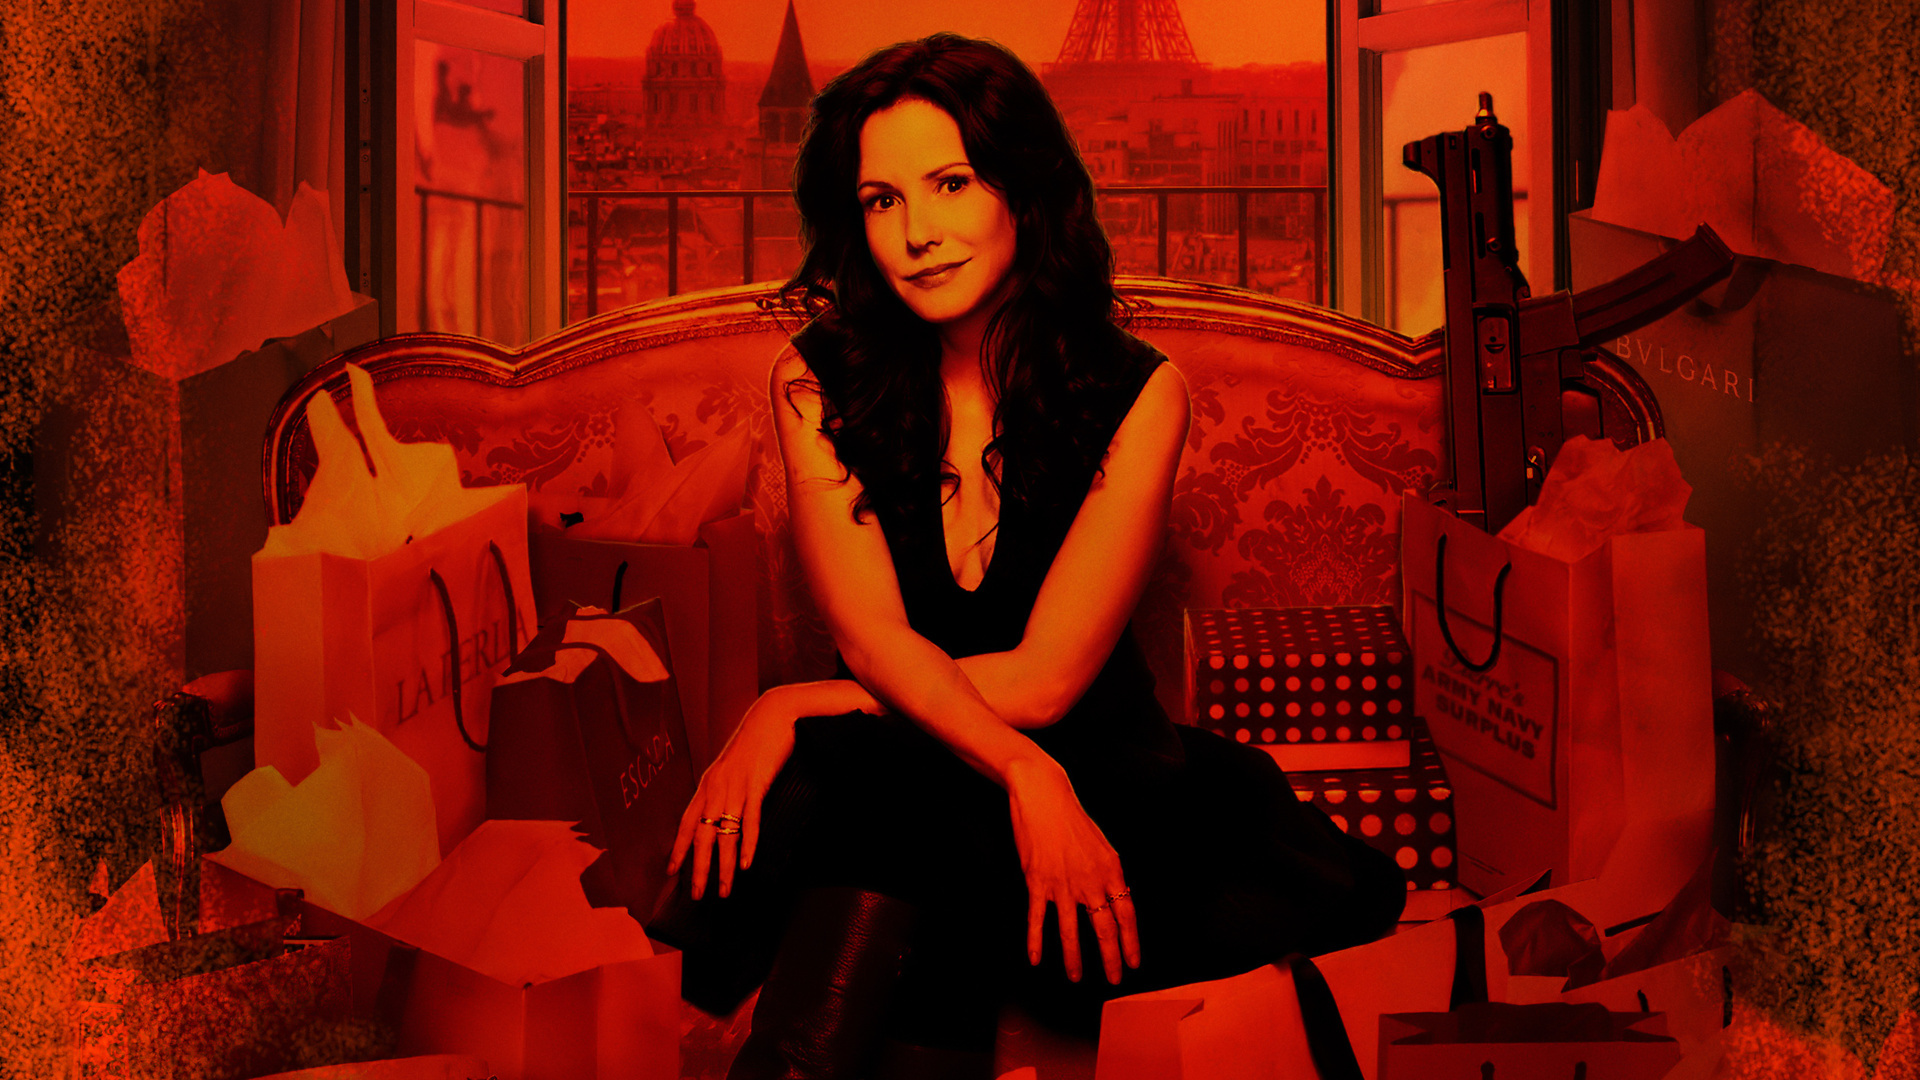 Mary-Louise Parker wallpapers, Variety of styles, Aesthetic options, Diverse collection, 1920x1080 Full HD Desktop